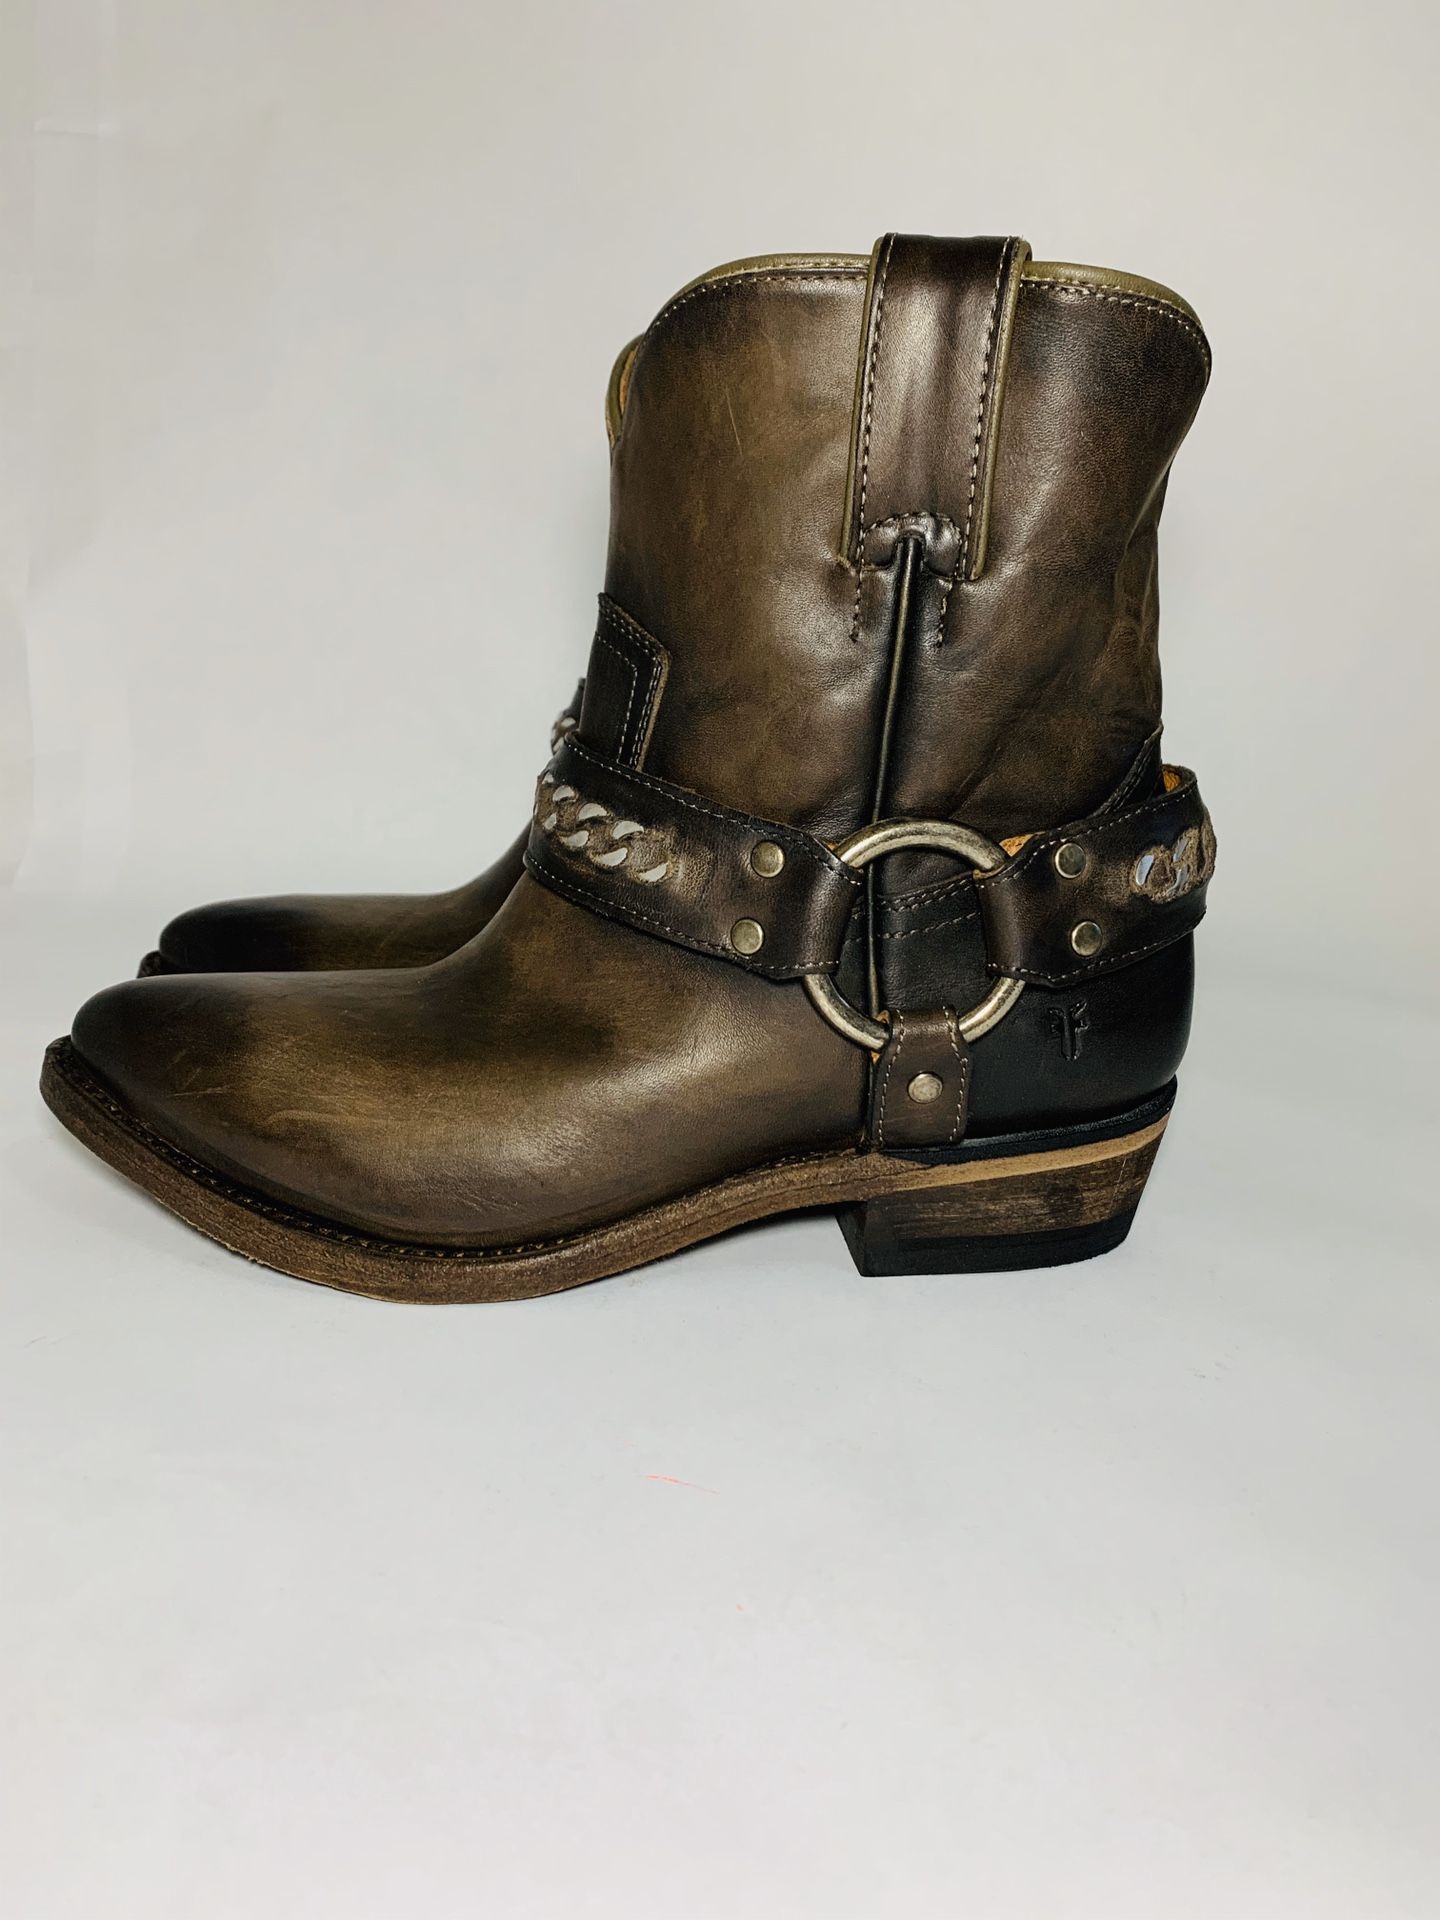 Women's Billy Chain Short Western Boot size 6 new without box 100% authentic